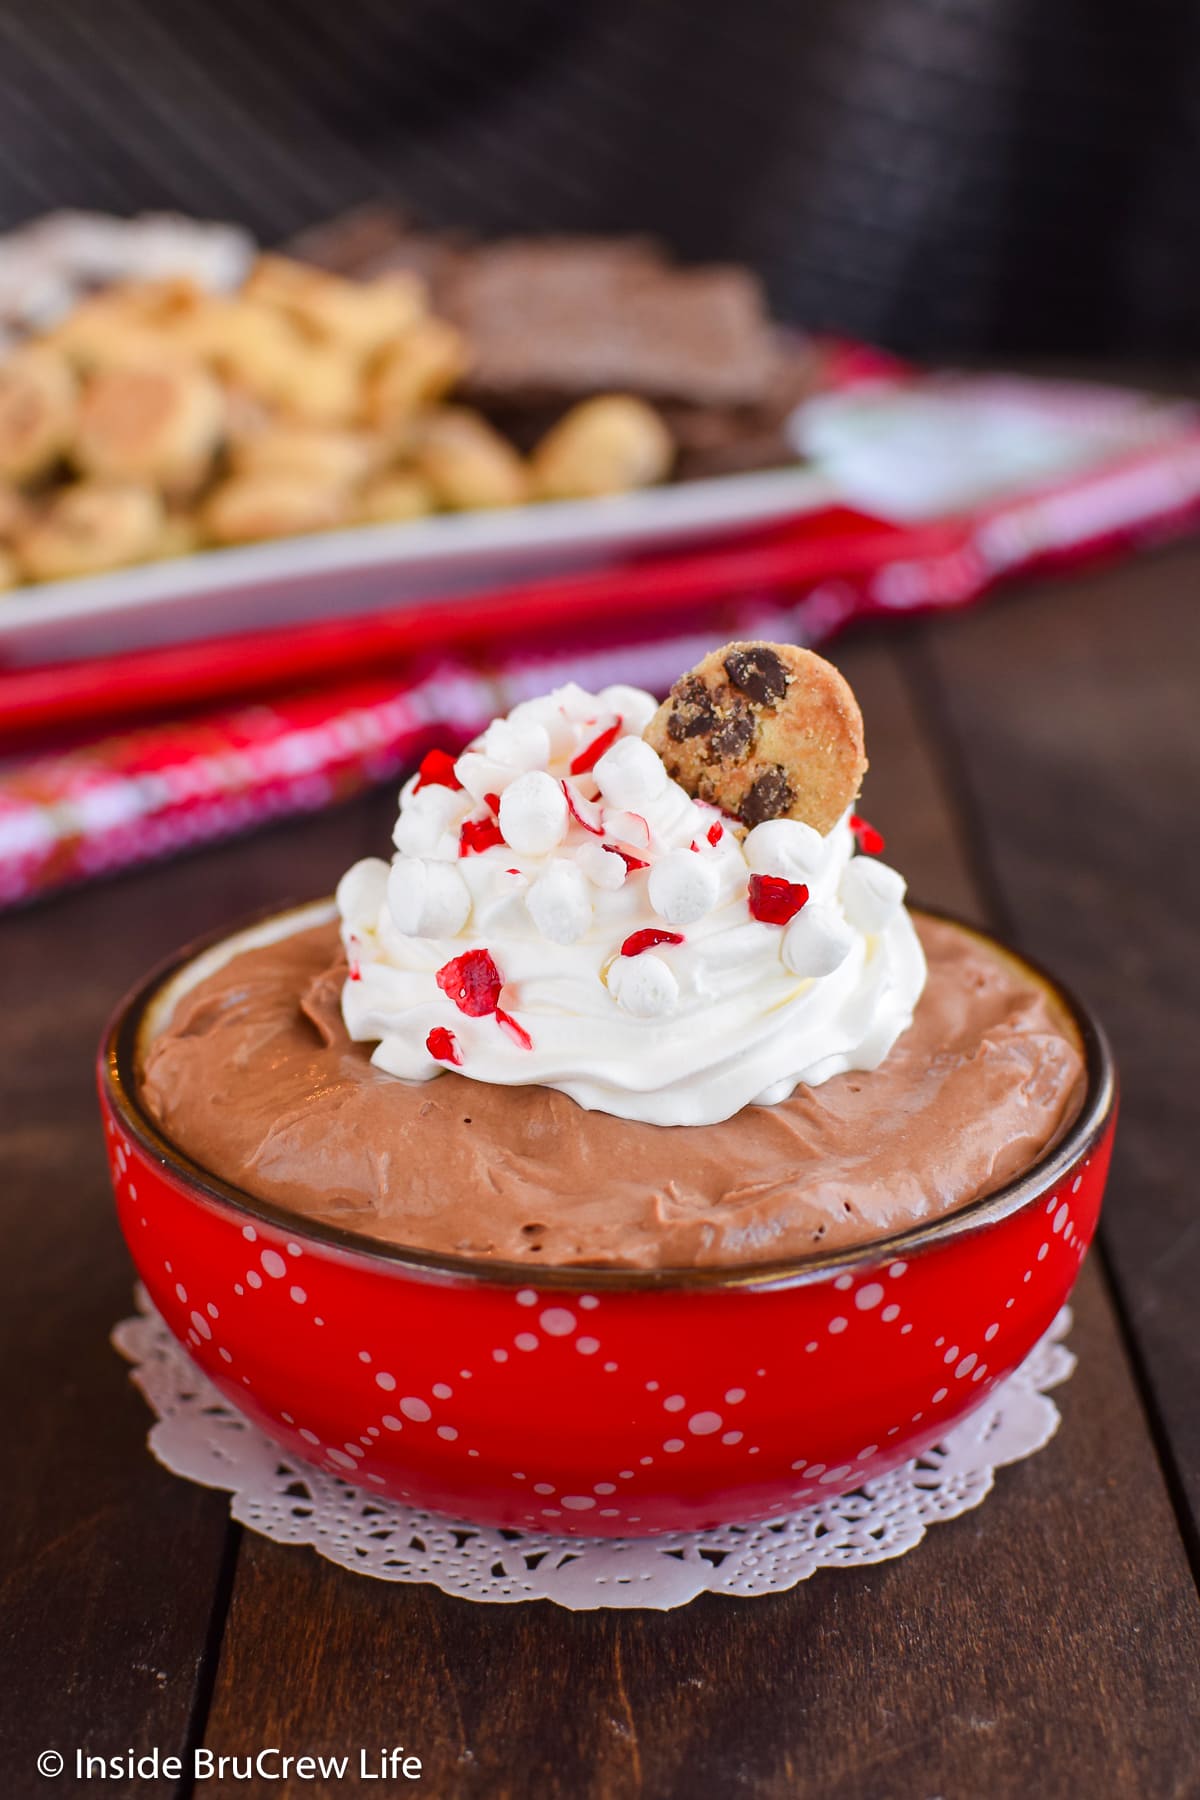 A bowl filled with chocolate dip and a plate of cookies behind it.